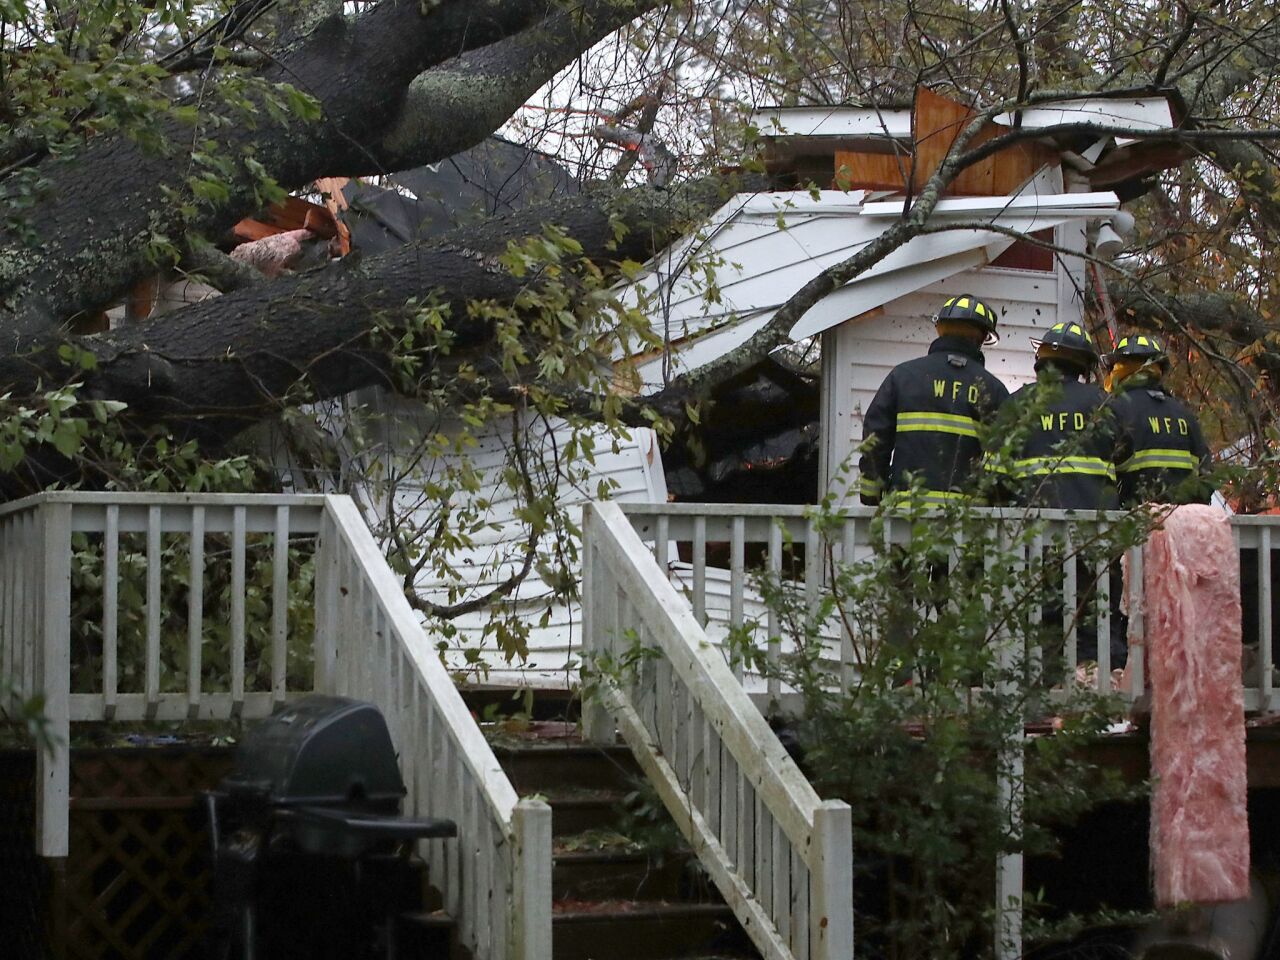 Firefighters arrive at a home where a large tree fell and trapped three people in Wilmington, N.C. One man was taken out of the home in critical condition, and the condition of the others is unknown.